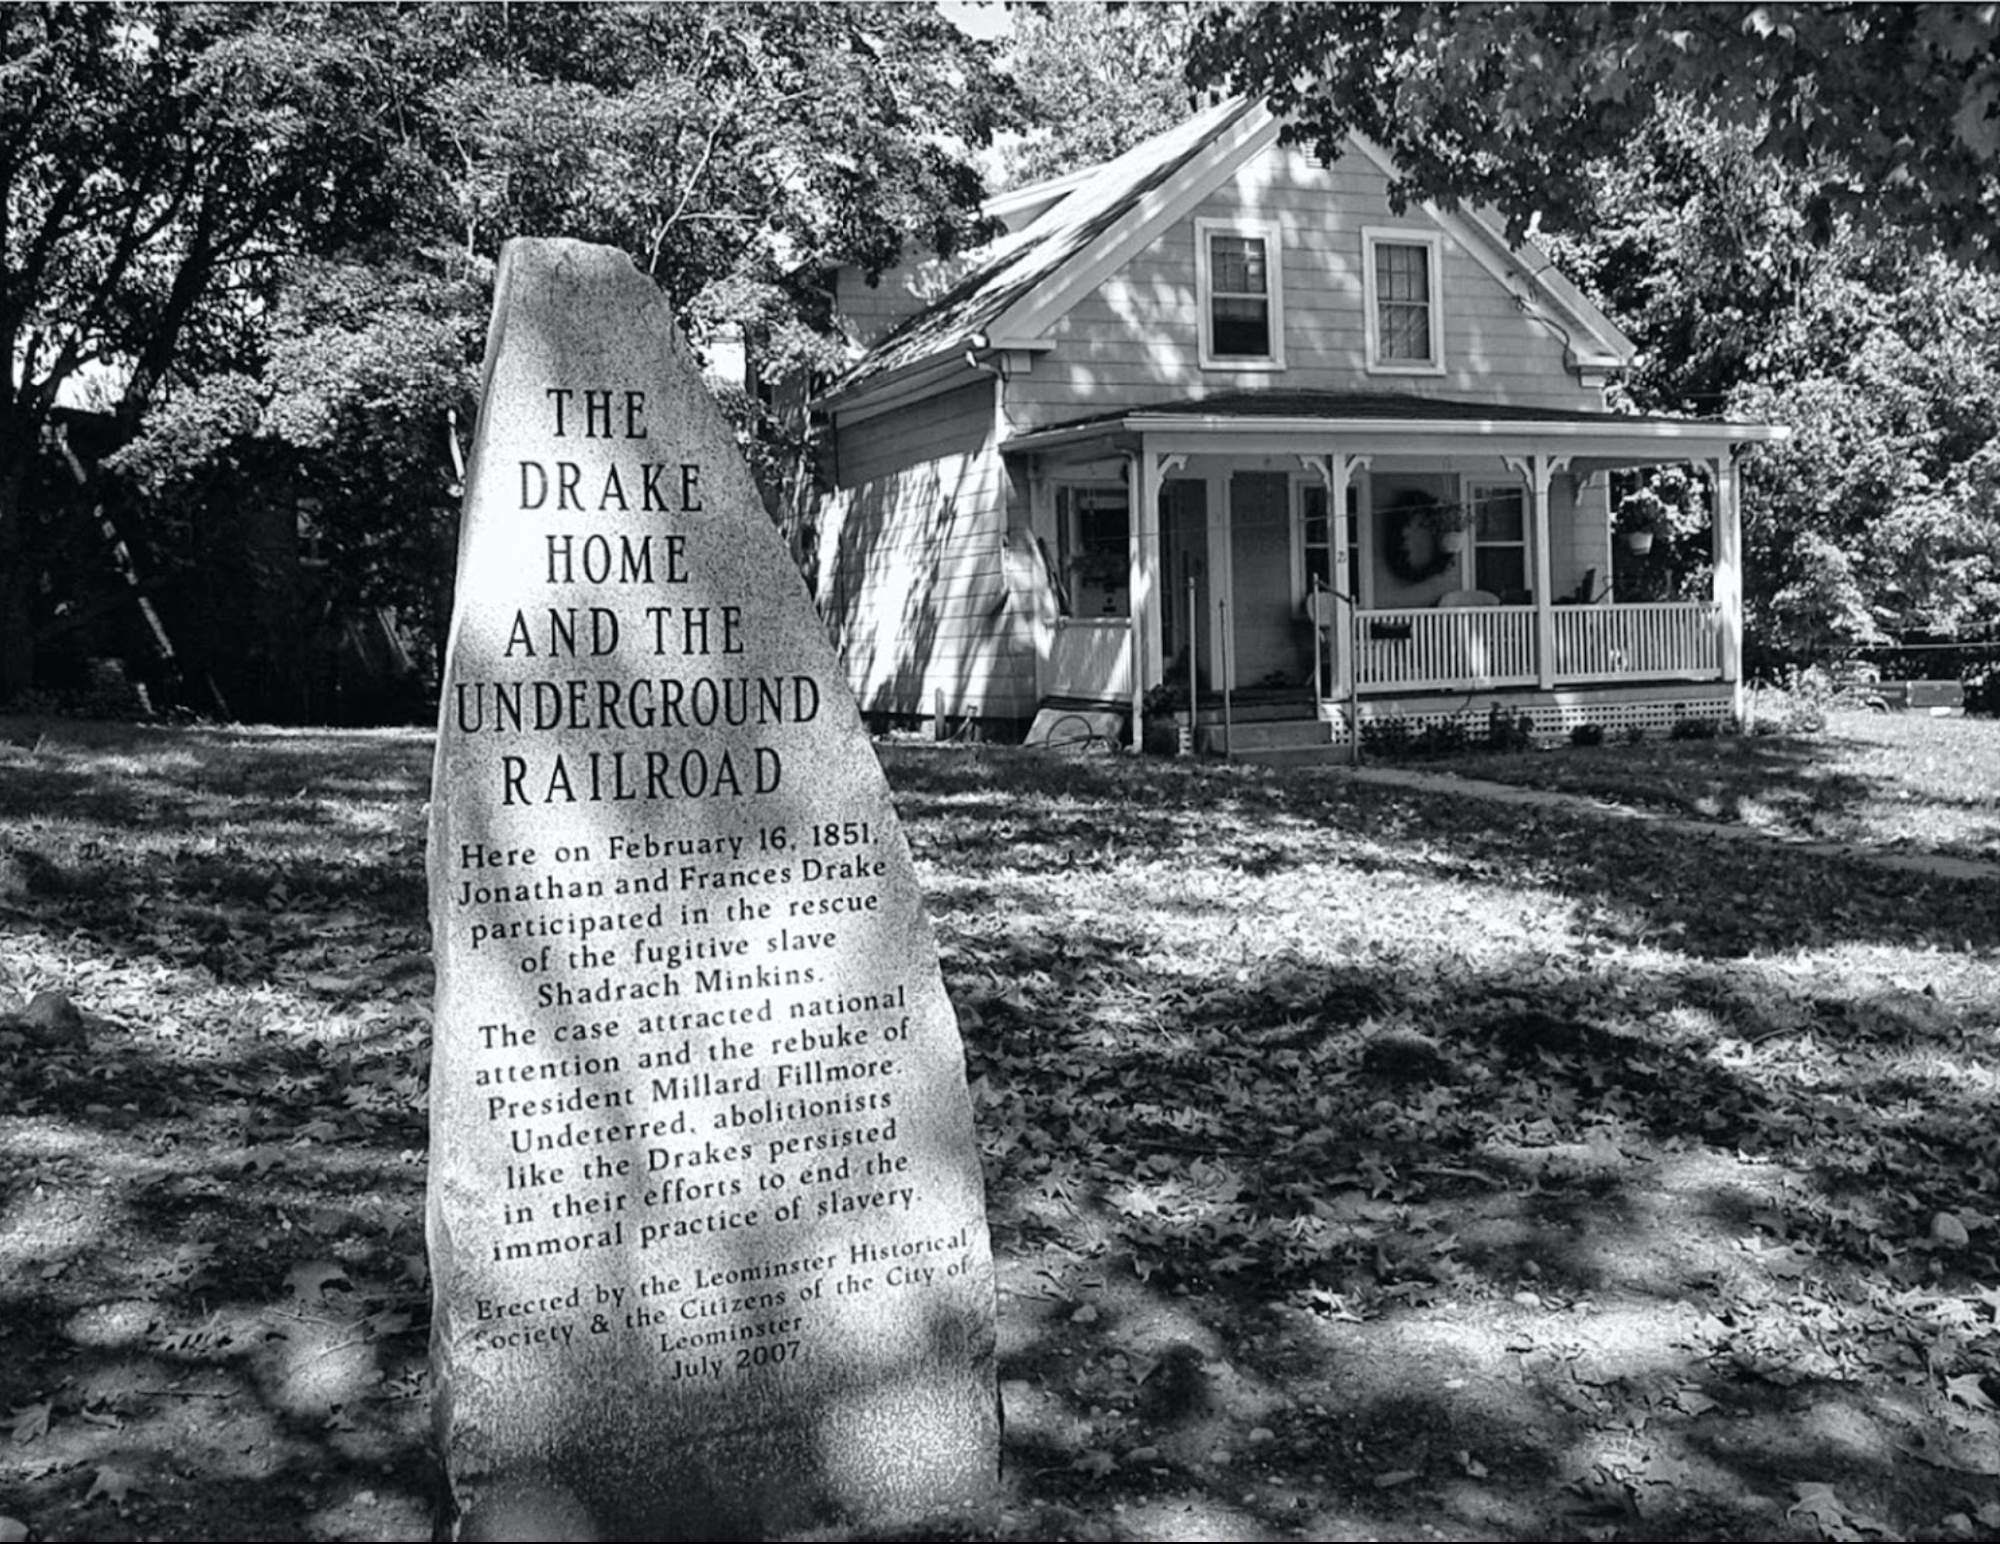 Photograph of the Drake House in Leominster, MA. 